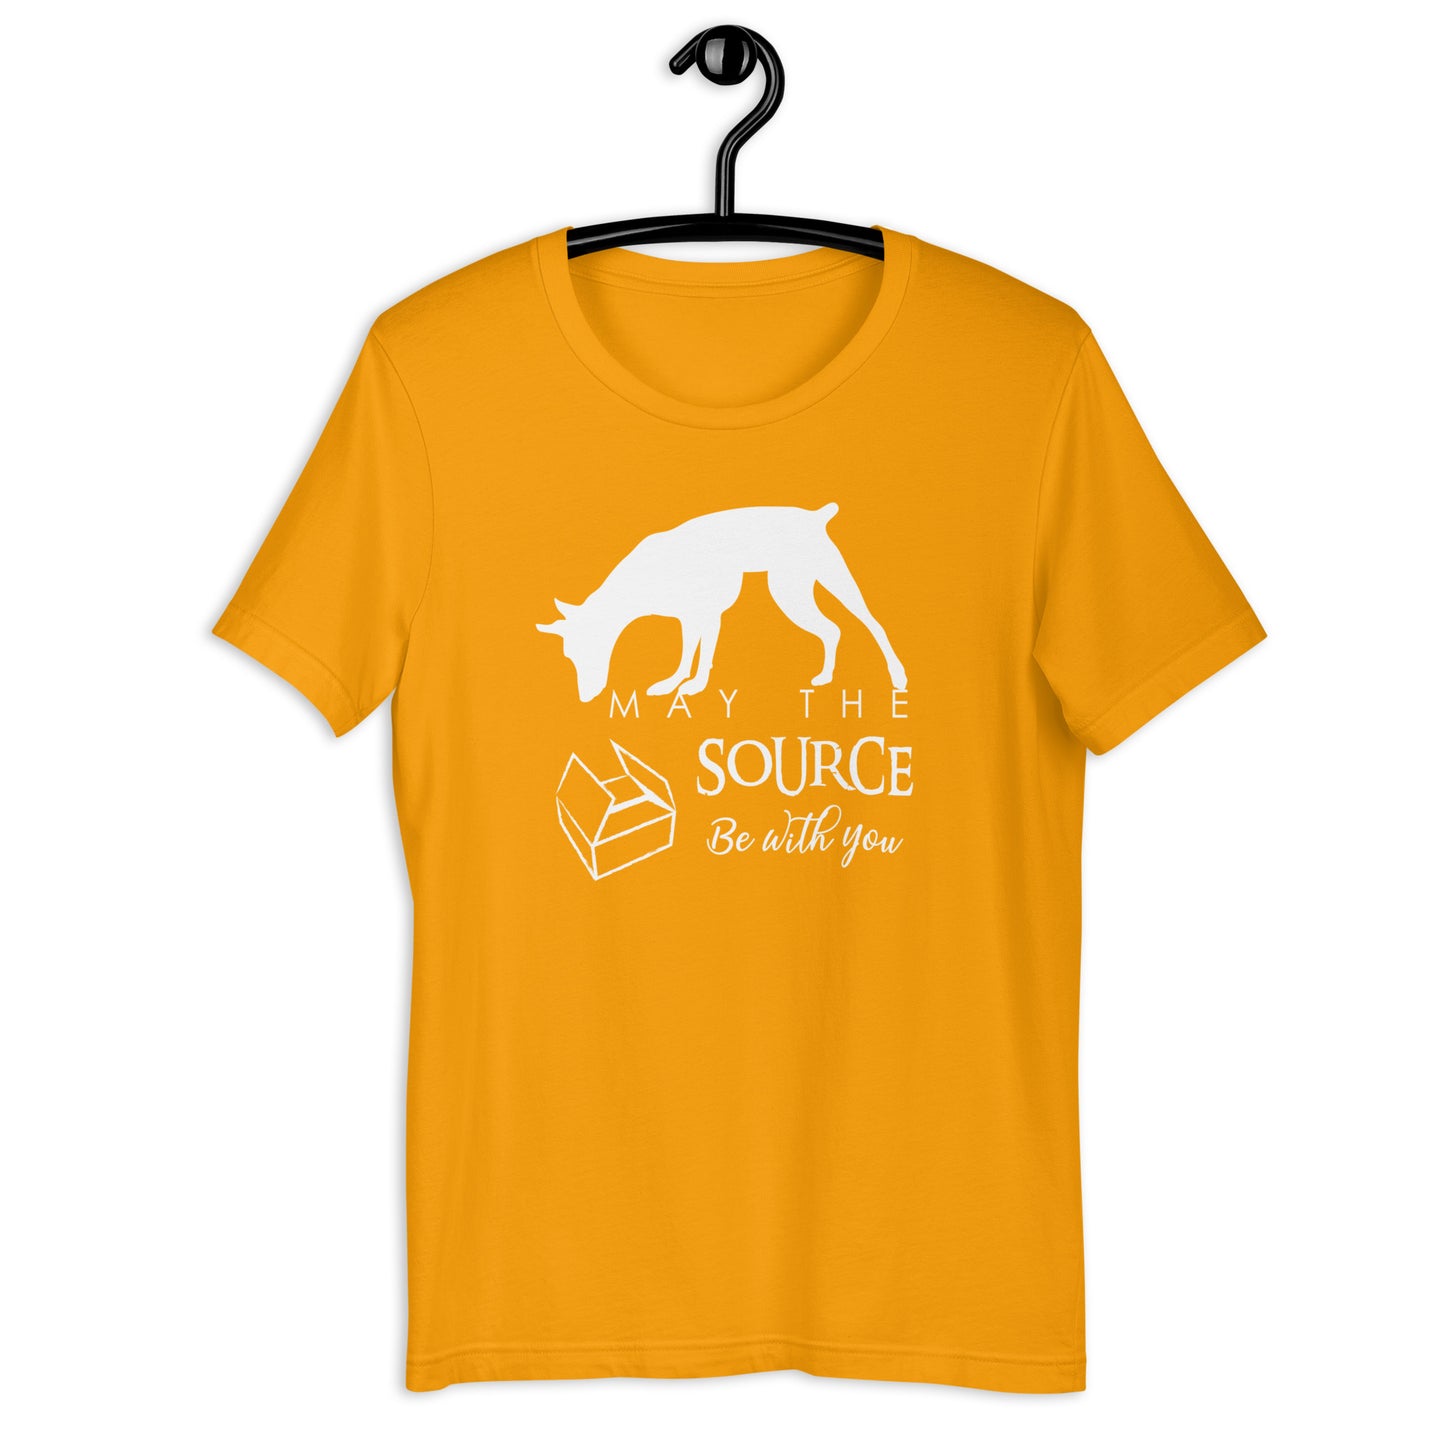 MAY THE SOURCE BE WITH - - DOBIE - Unisex t-shirt